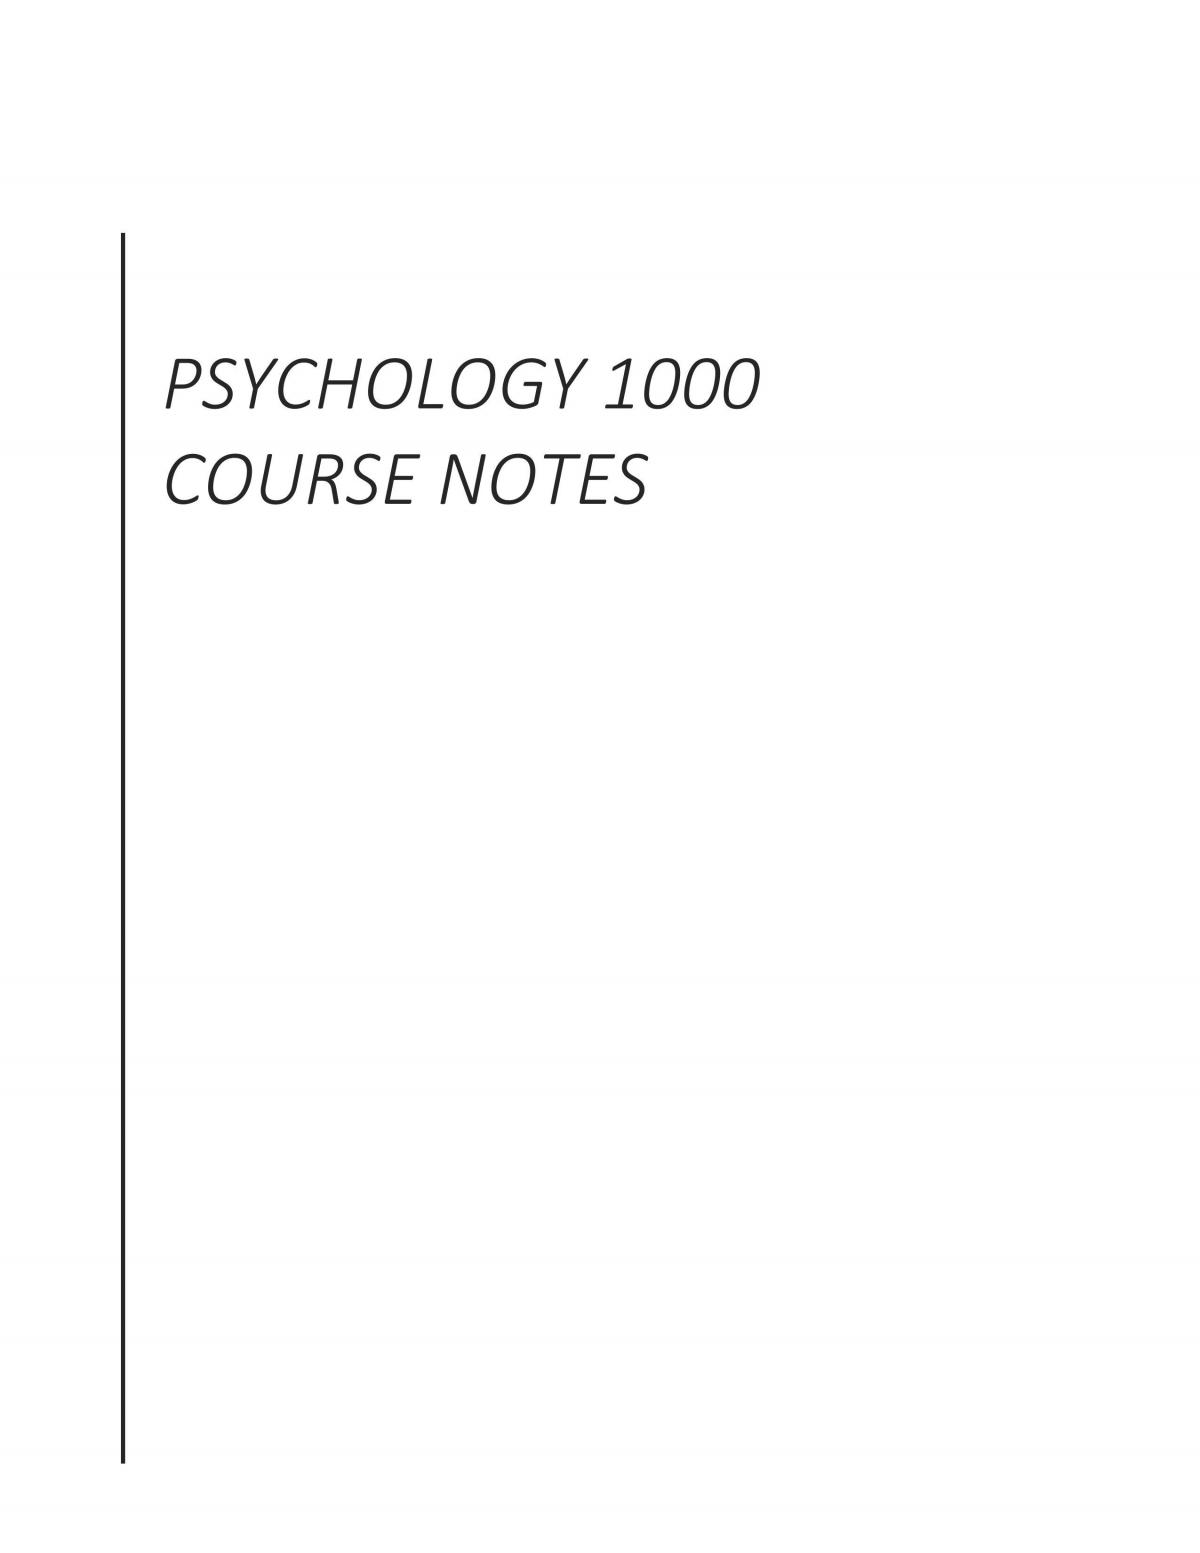 Complete Psychology 1000 Notes - Page 1